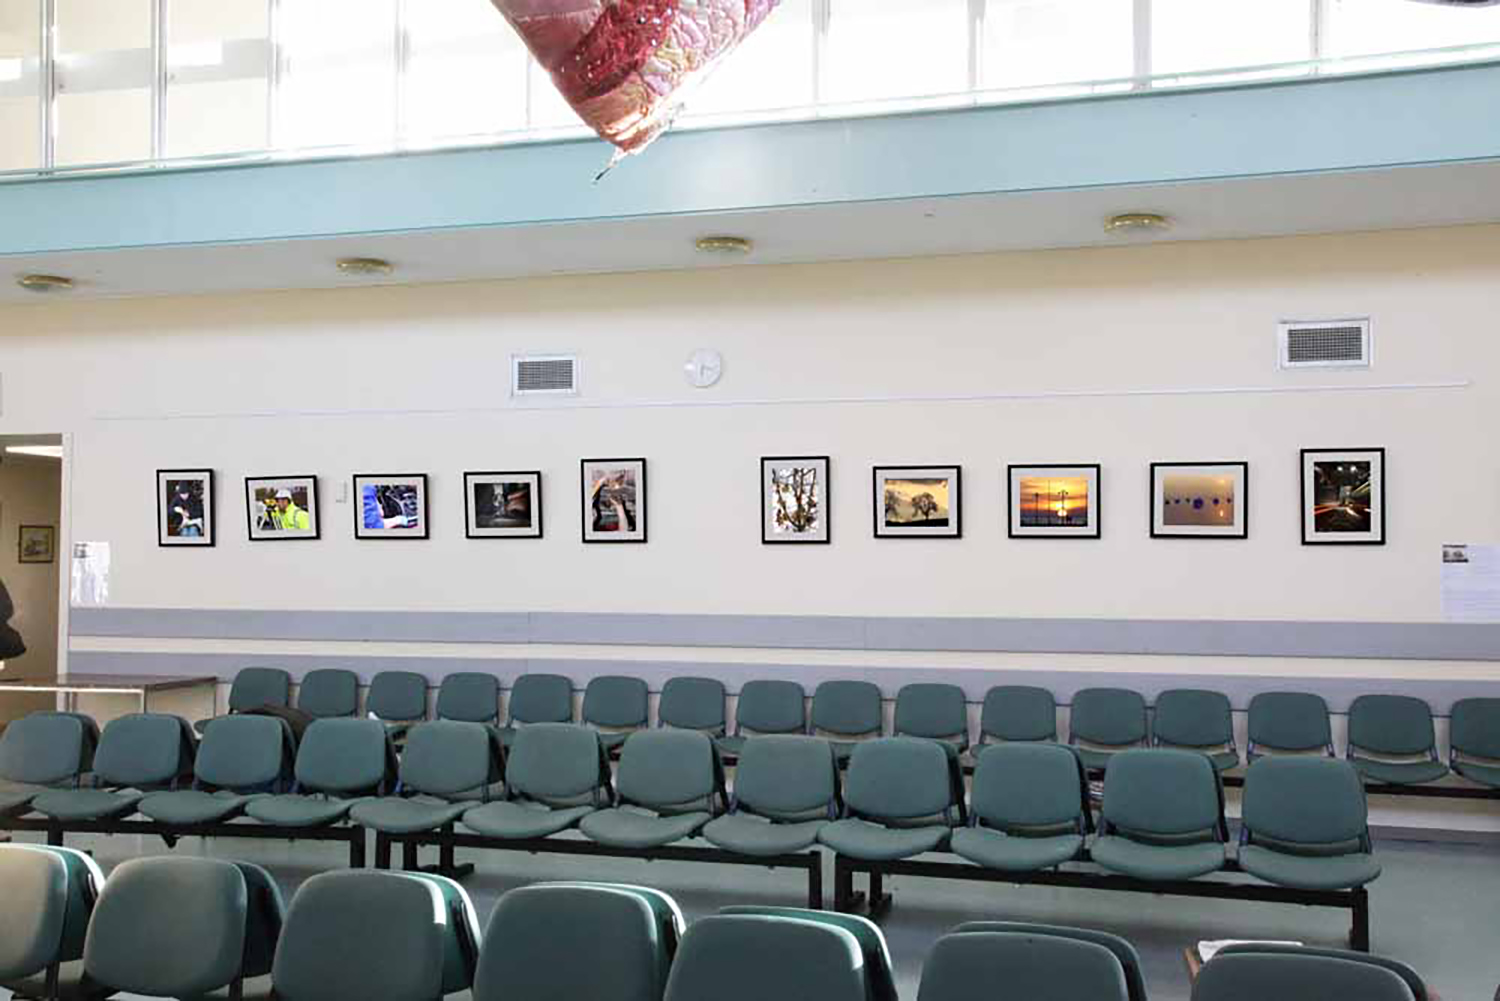 Philip Curnow's photography helping brighten up waiting area